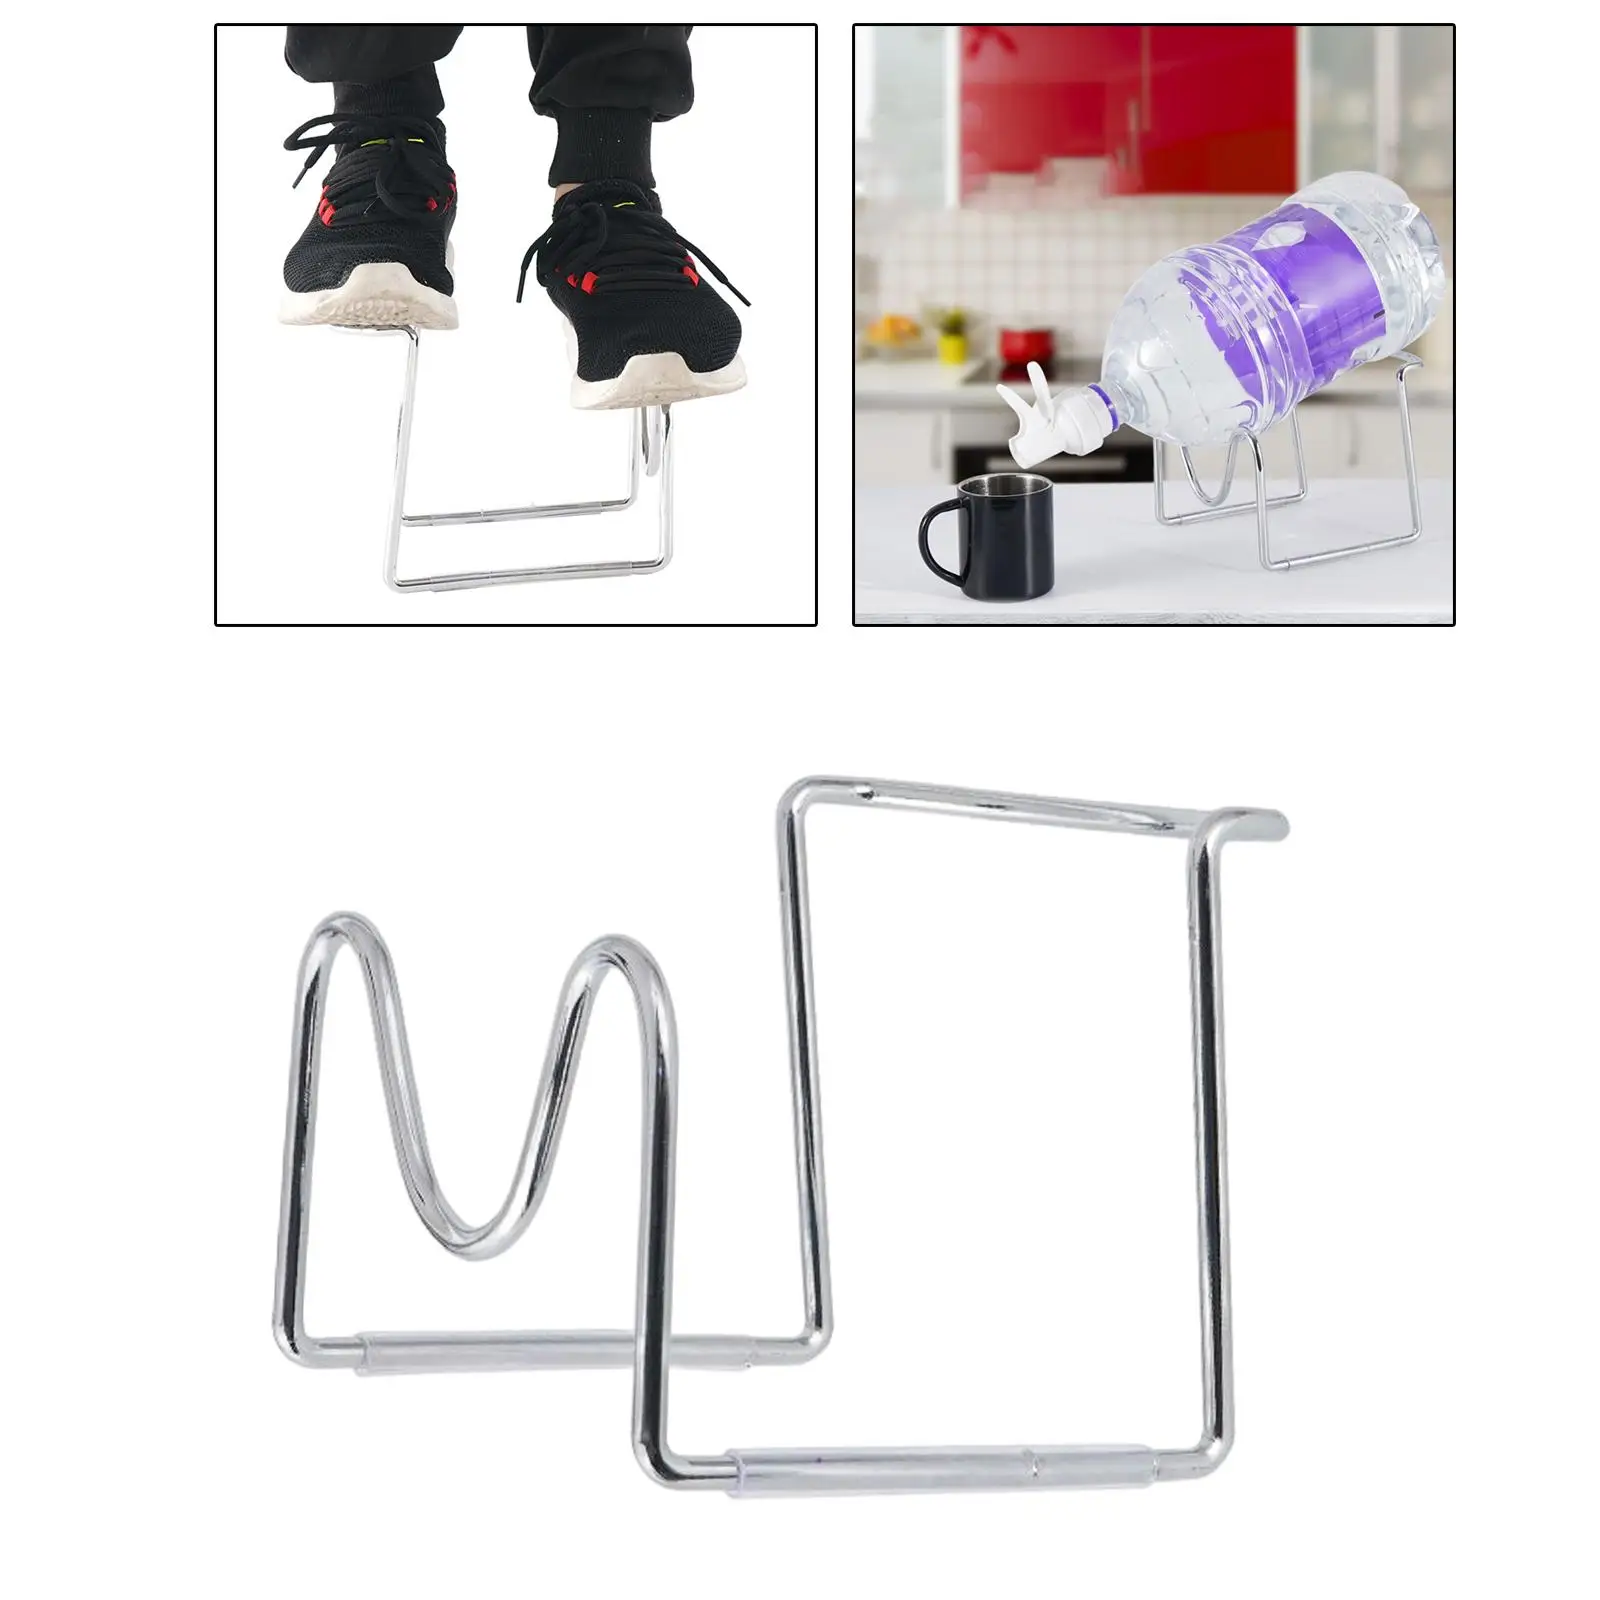 Stainless Jug Stand Beverage Holder Cradle Rack for Party